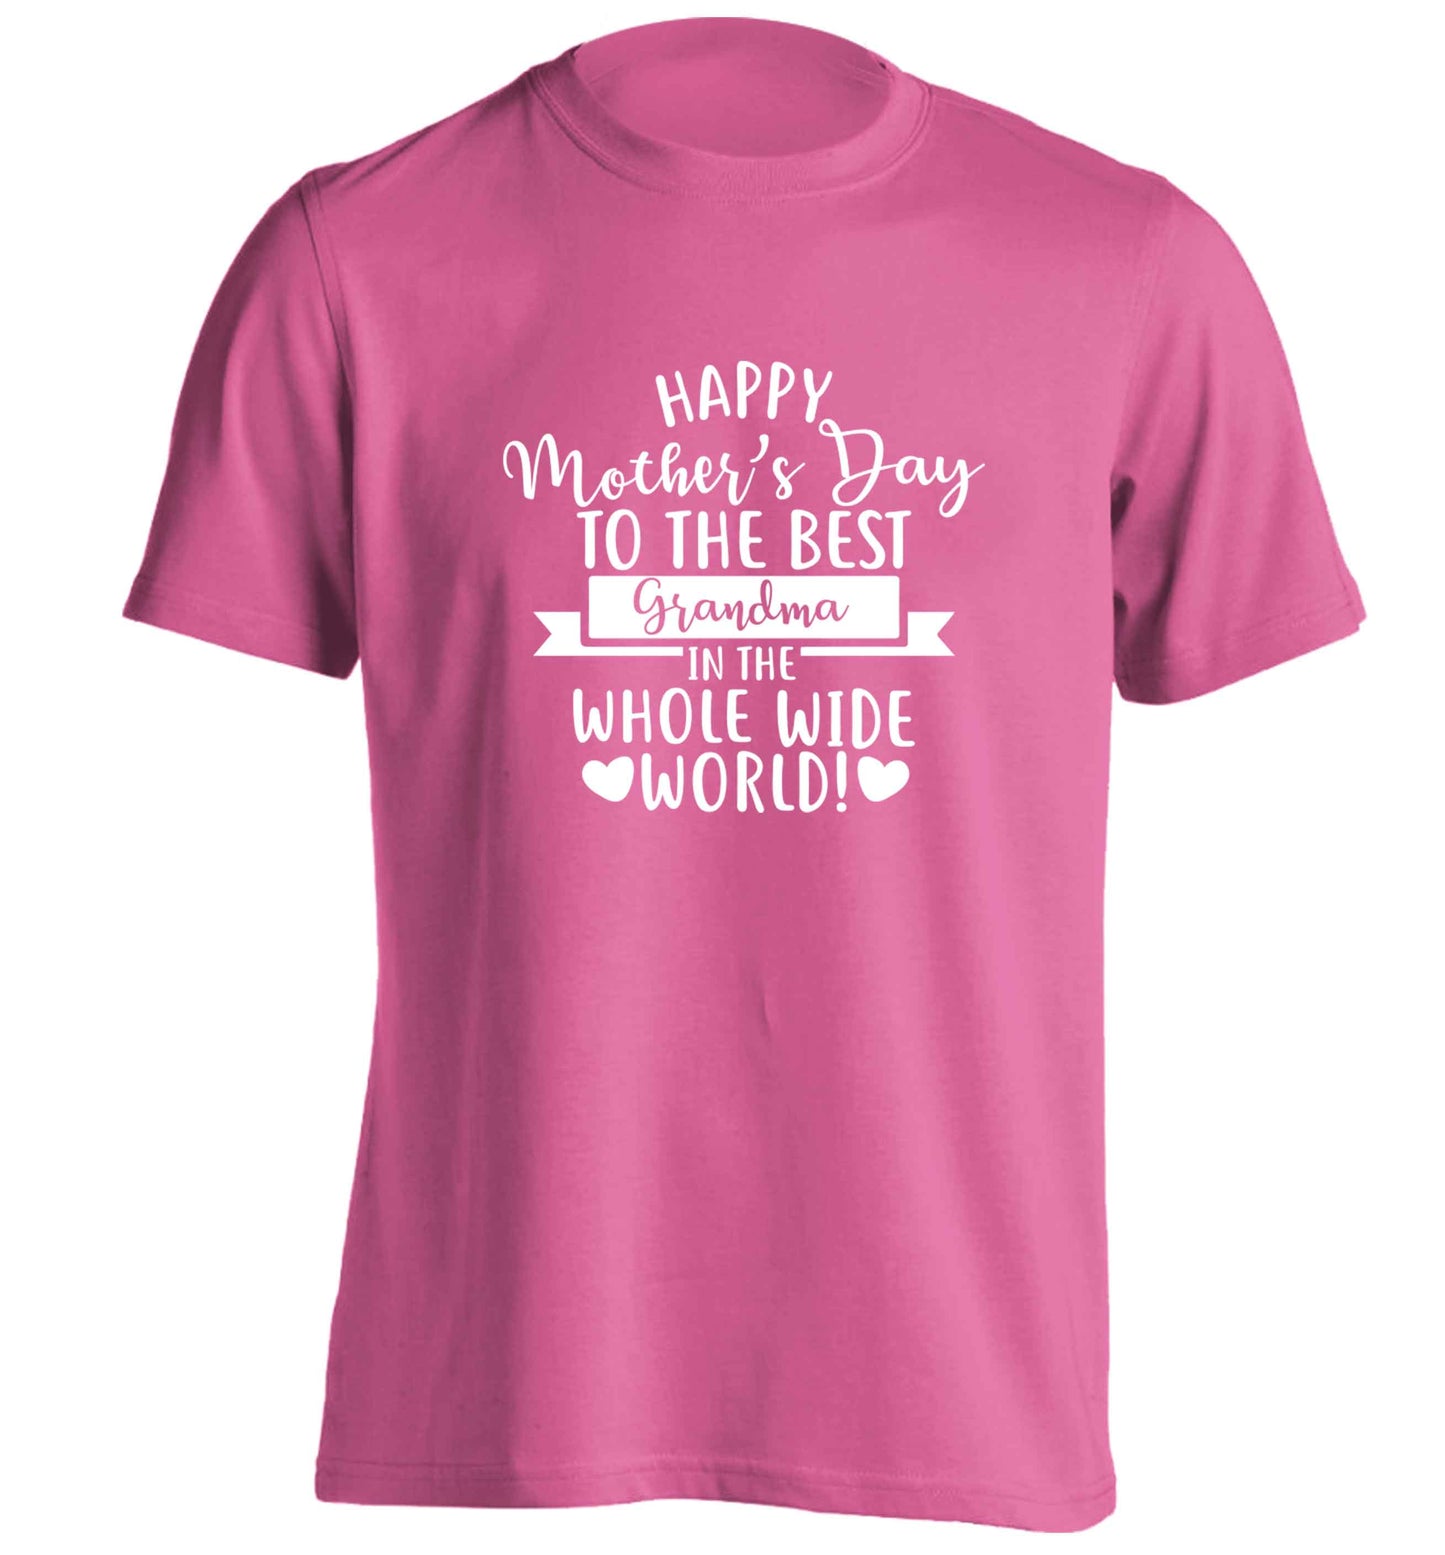 Happy mother's day to the best grandma in the world adults unisex pink Tshirt 2XL